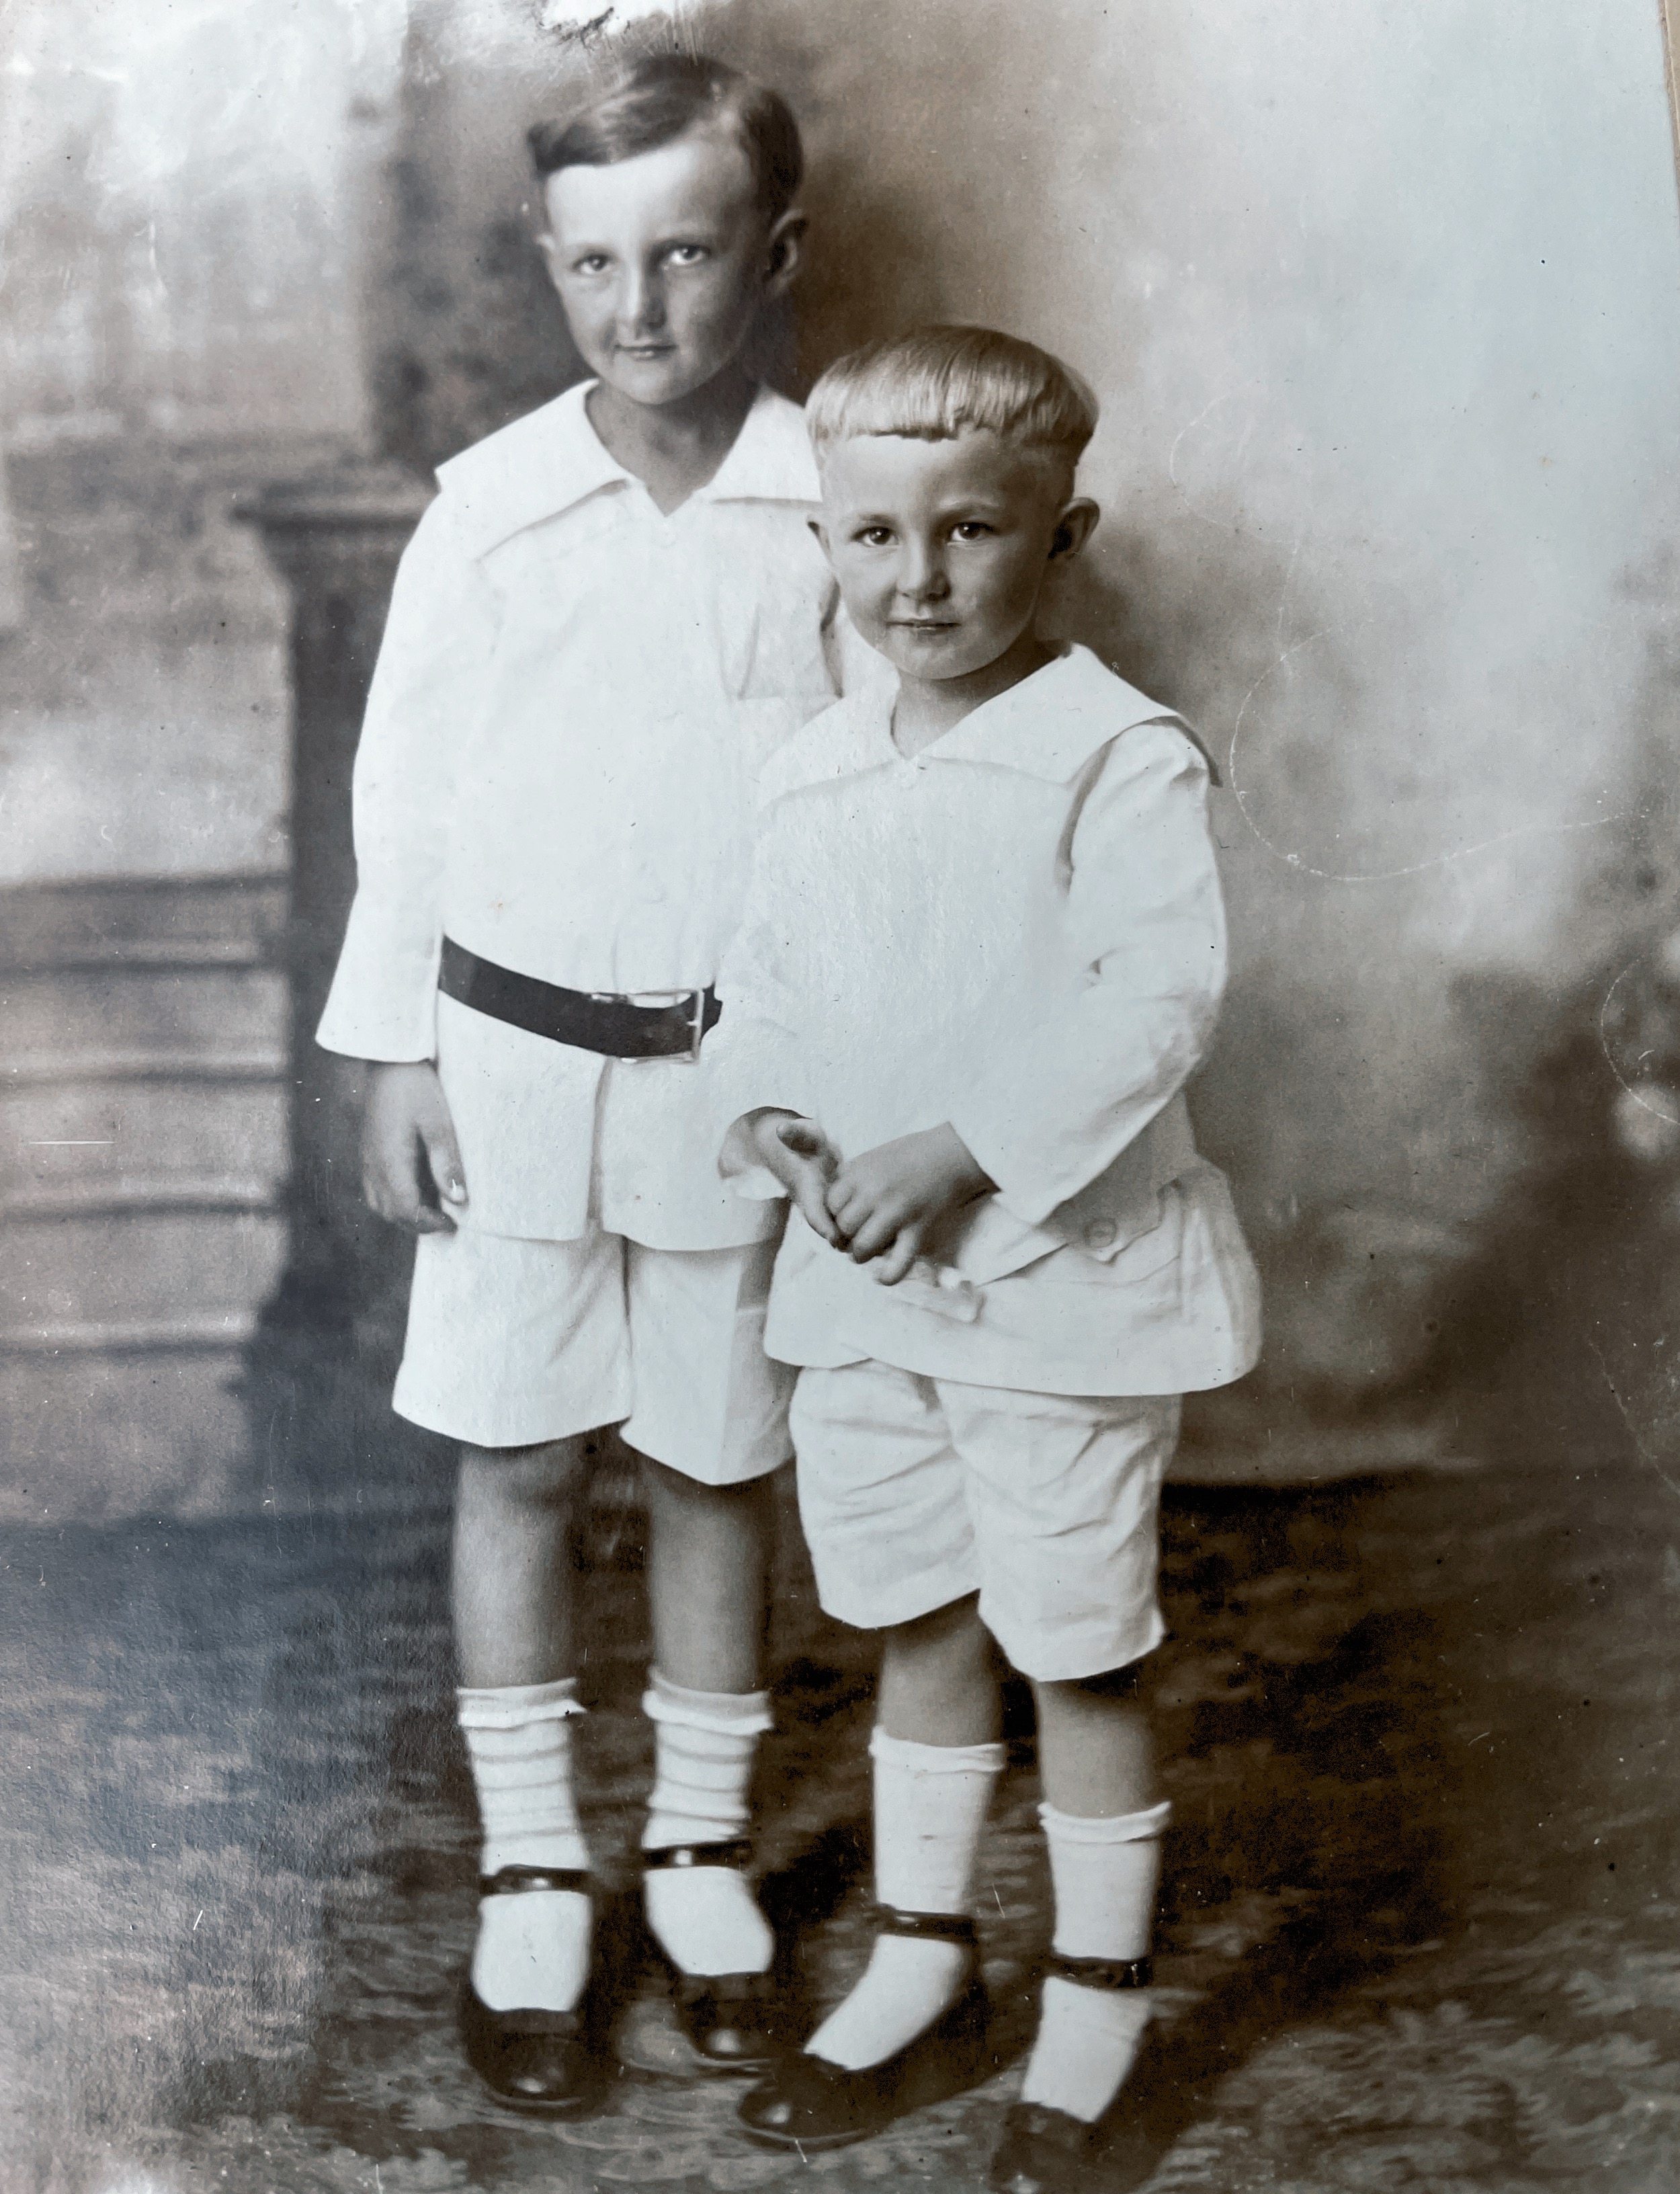 Earl Strimple on right 2-3 years old 
Wilfred Strimple on left 5-6 years old
Around 1918